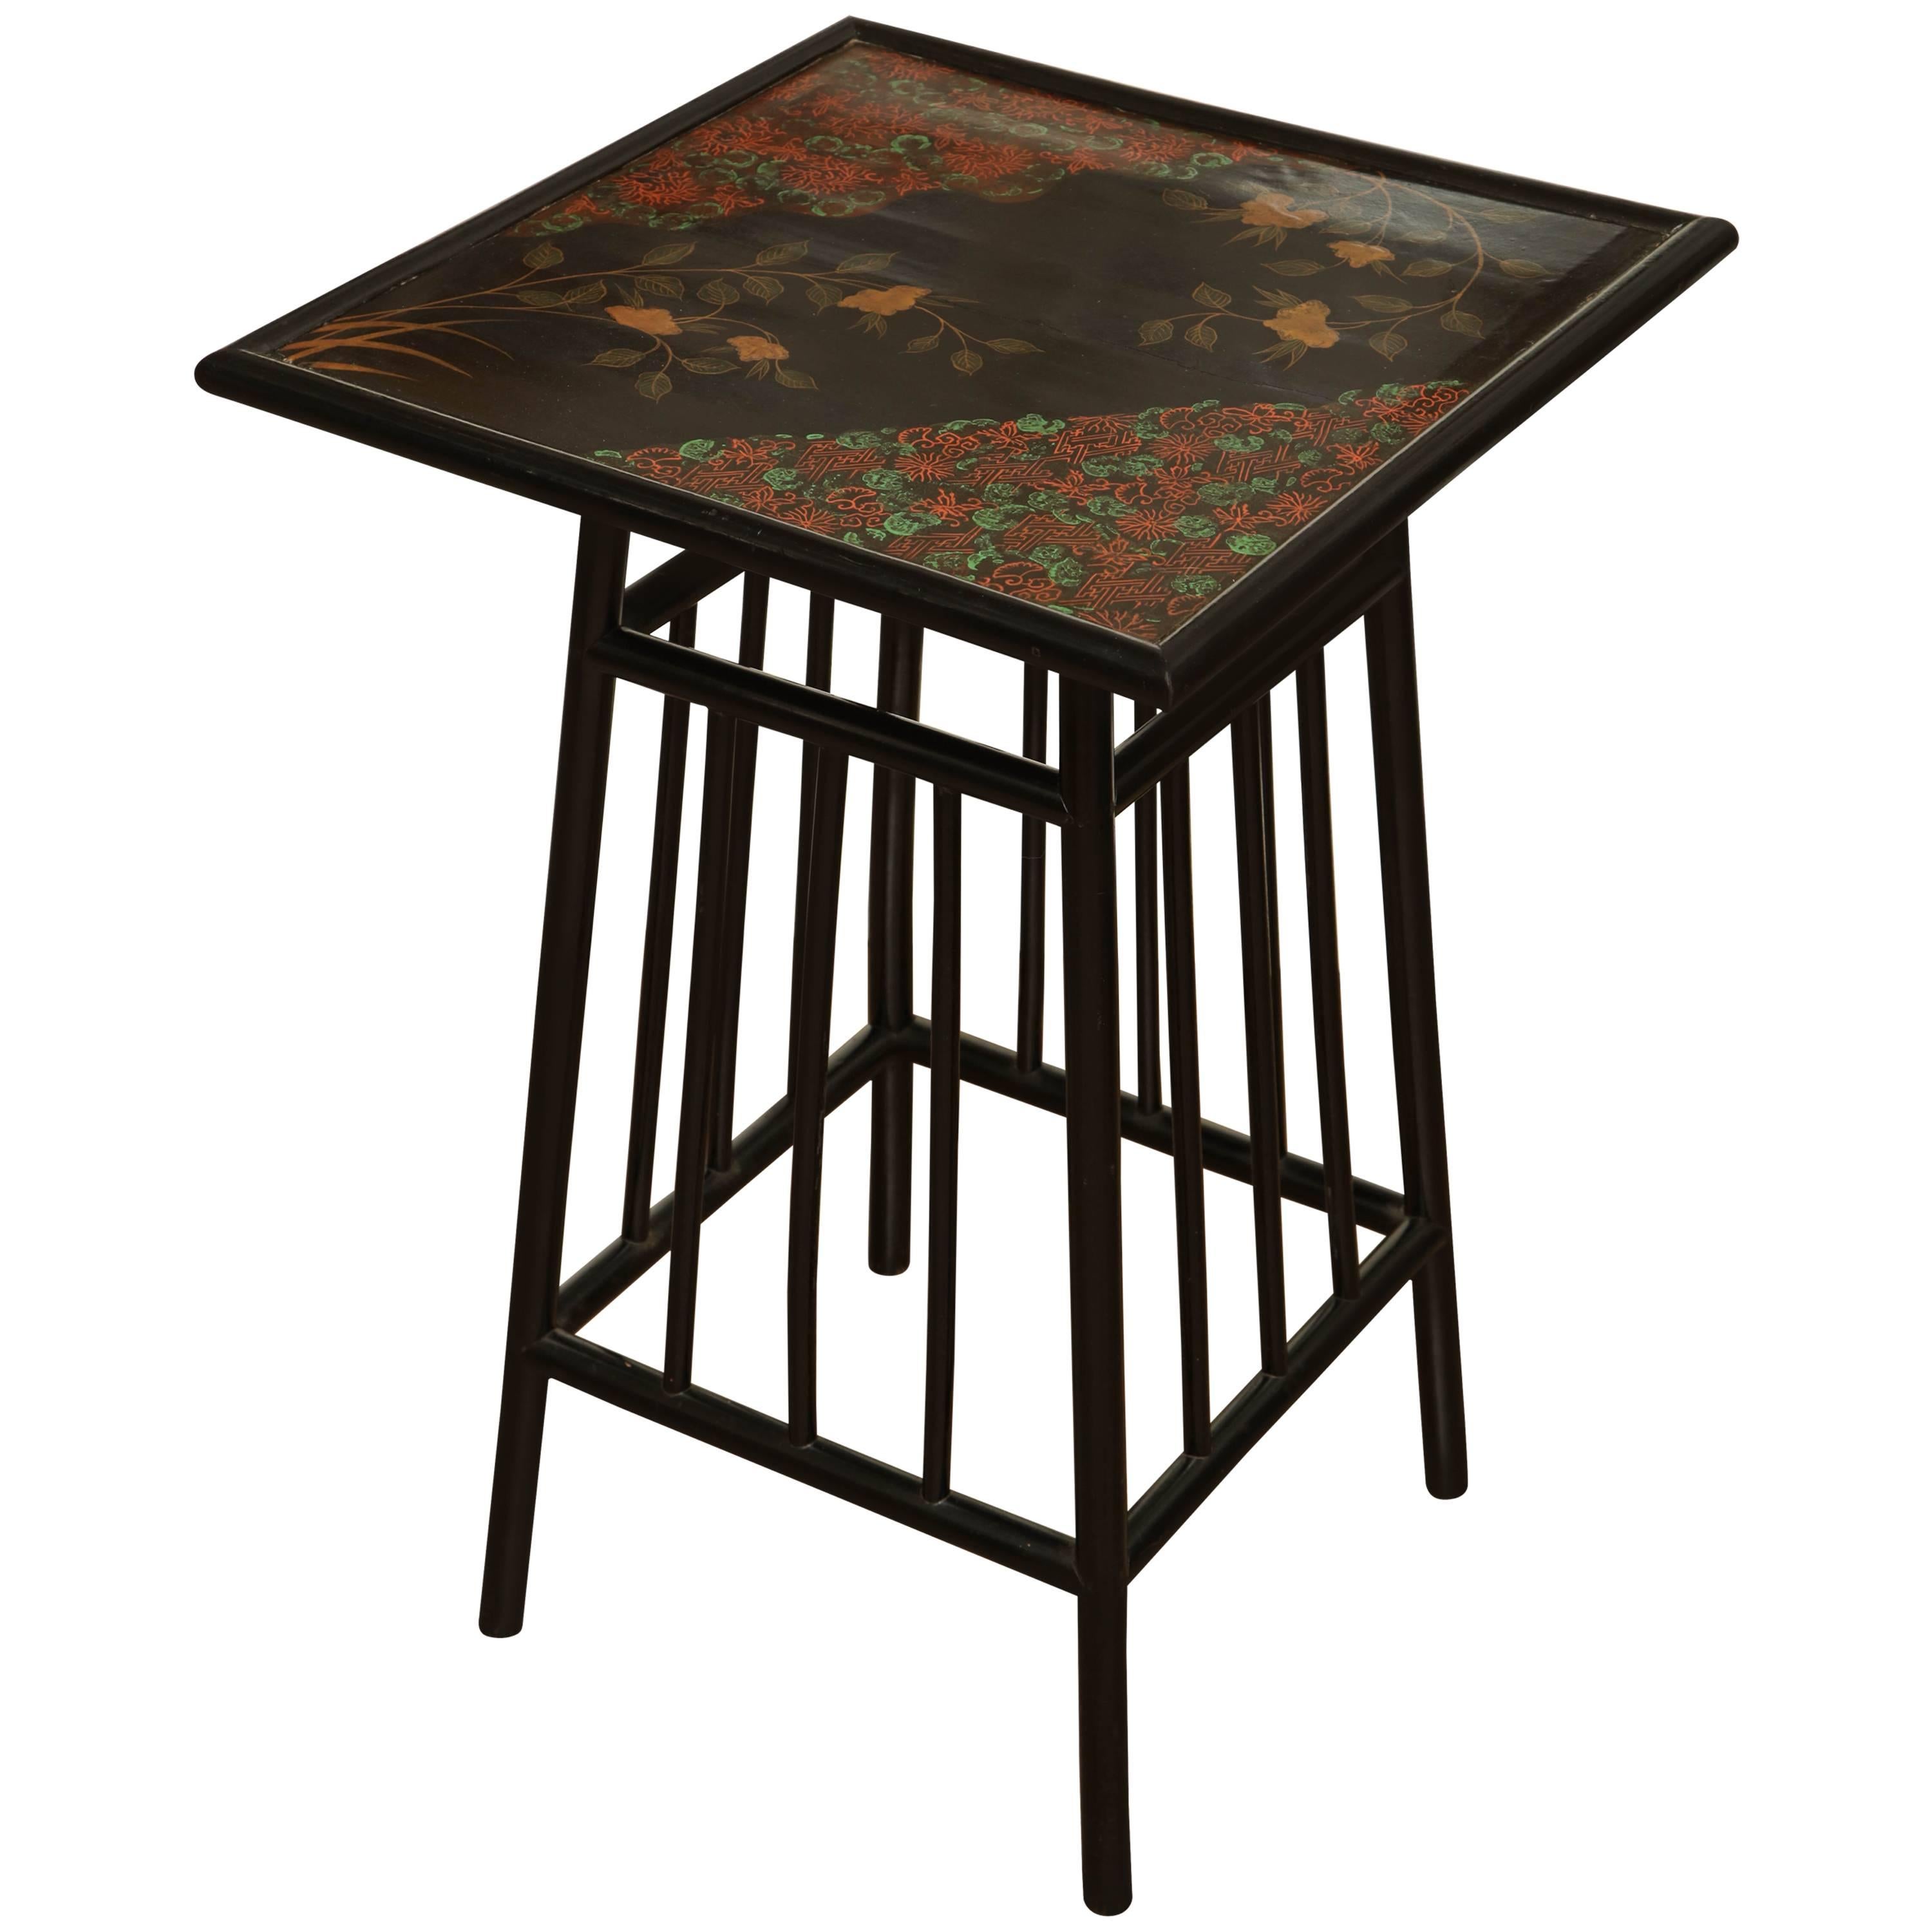 Late 19th Century English, Lacquered and Decorated Table